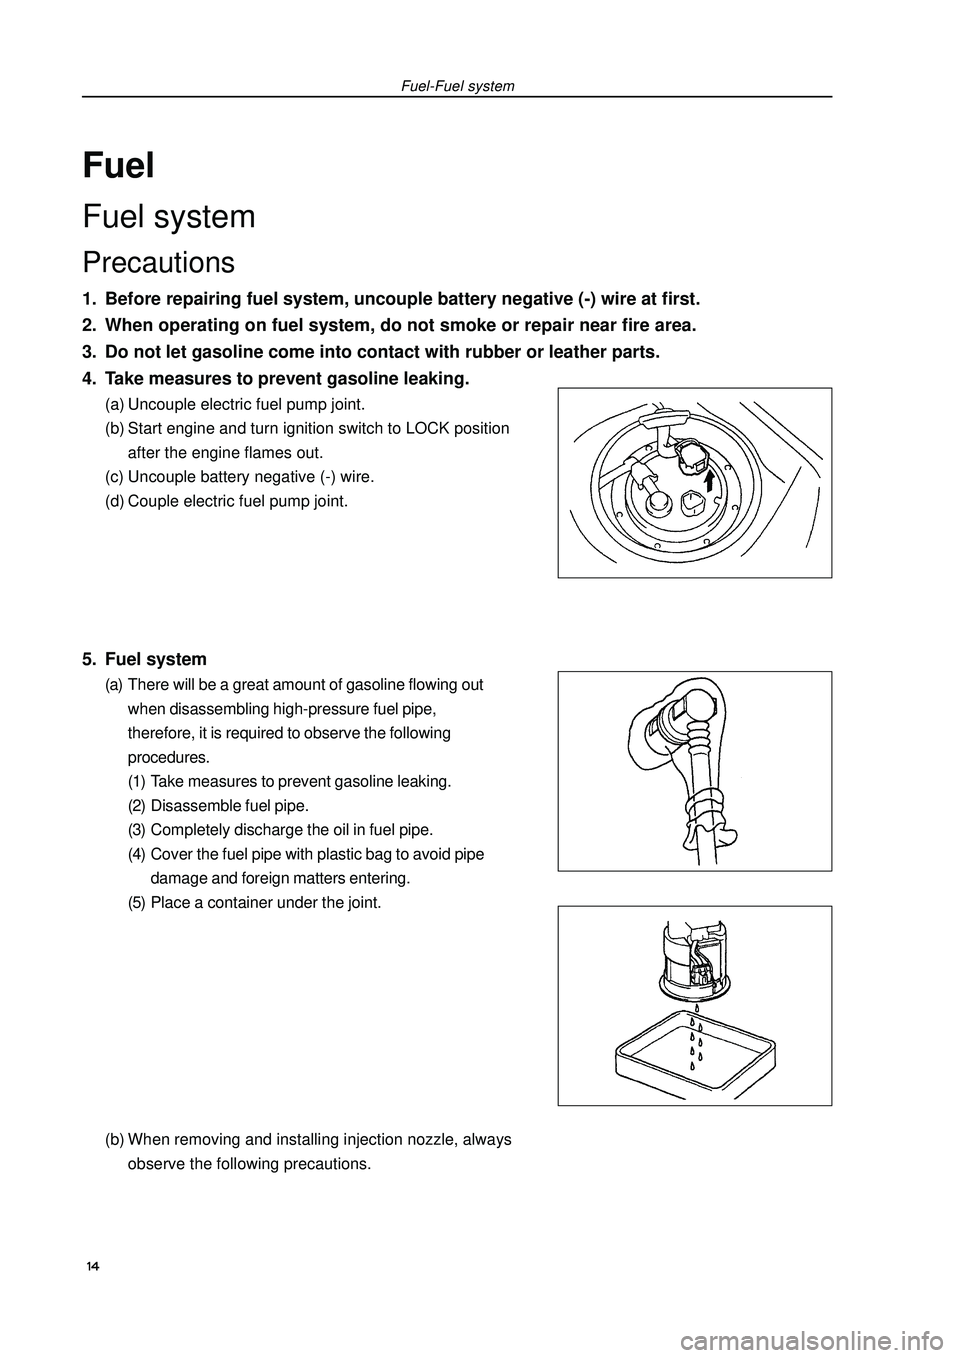 GEELY FC 2008  Workshop Manual FuelFuel systemPrecautions1. Before repairing fuel system, uncouple battery negative (-) wire at first.
2. When operating on fuel system, do not smoke or repair near fire area.
3. Do not let gasoline 